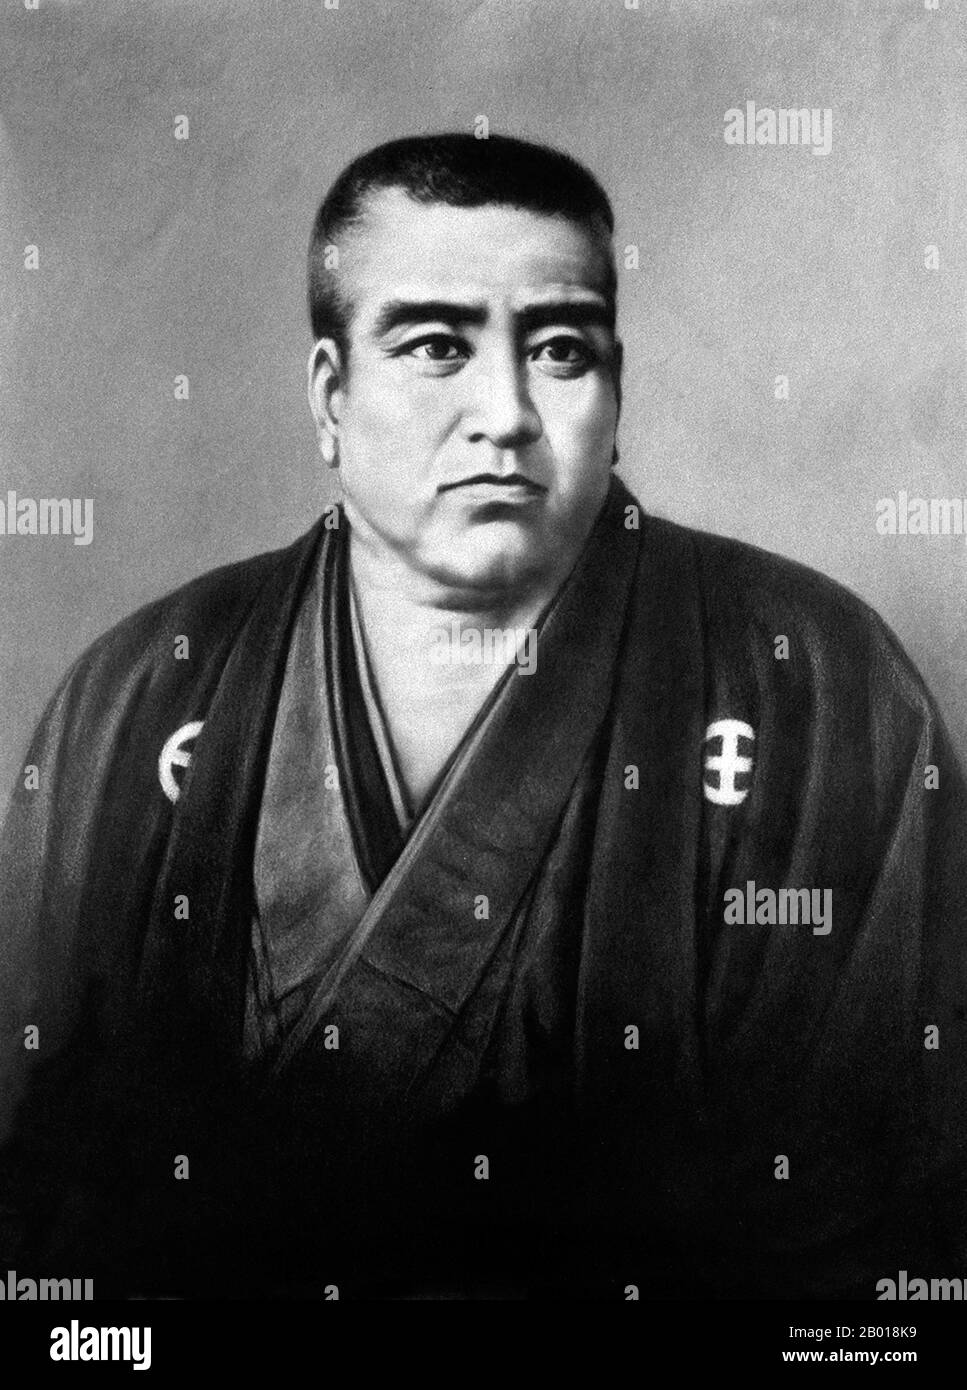 Japan: Saigō Takamori (23 January 1828 - 24 September 1877), samurai and nobleman from the late Edo Period and early Meiji Era. He has been dubbed the last true samurai. Portrait by C. Nakagawa, c. 1870s.  Saigō Takamori, born Saigo Kokichi and literary name Saigo Nanshu, was one of the most influential samurai in Japanese history. He lived during the late Edo Period and early Meiji Era, and became a leader of the Meiji restoration. He later led the failed Satsuma Rebellion against the Meiji government, and committed seppuku during the Battle of Shiroyama. He became a national symbol and hero. Stock Photo